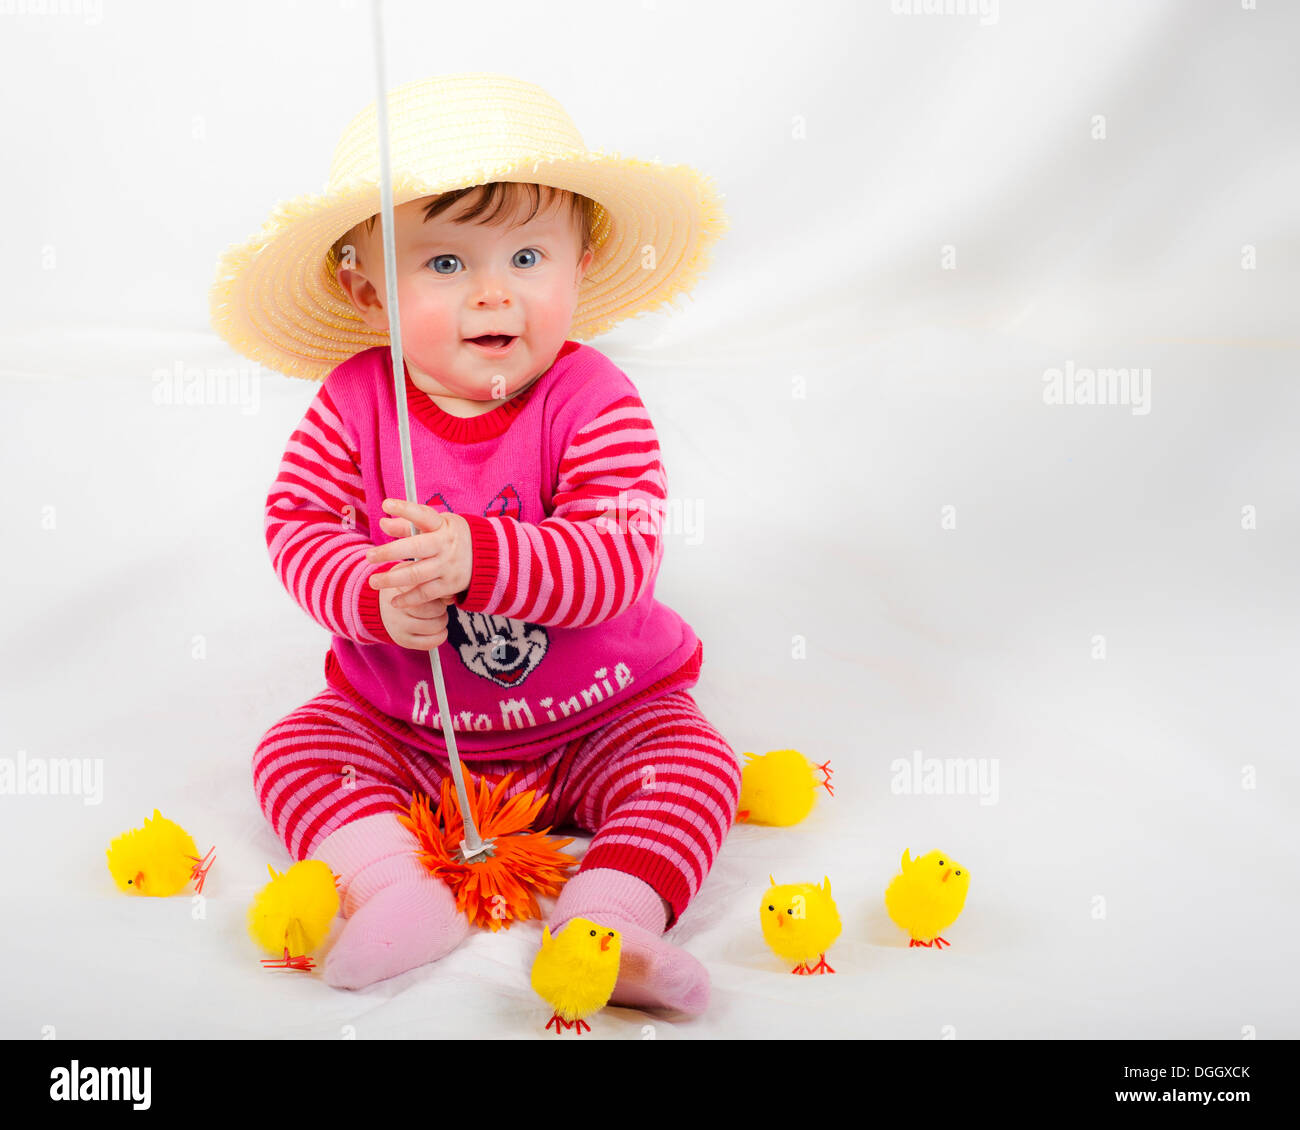 baby girl in cute pose wearing straw hat Stock Photo